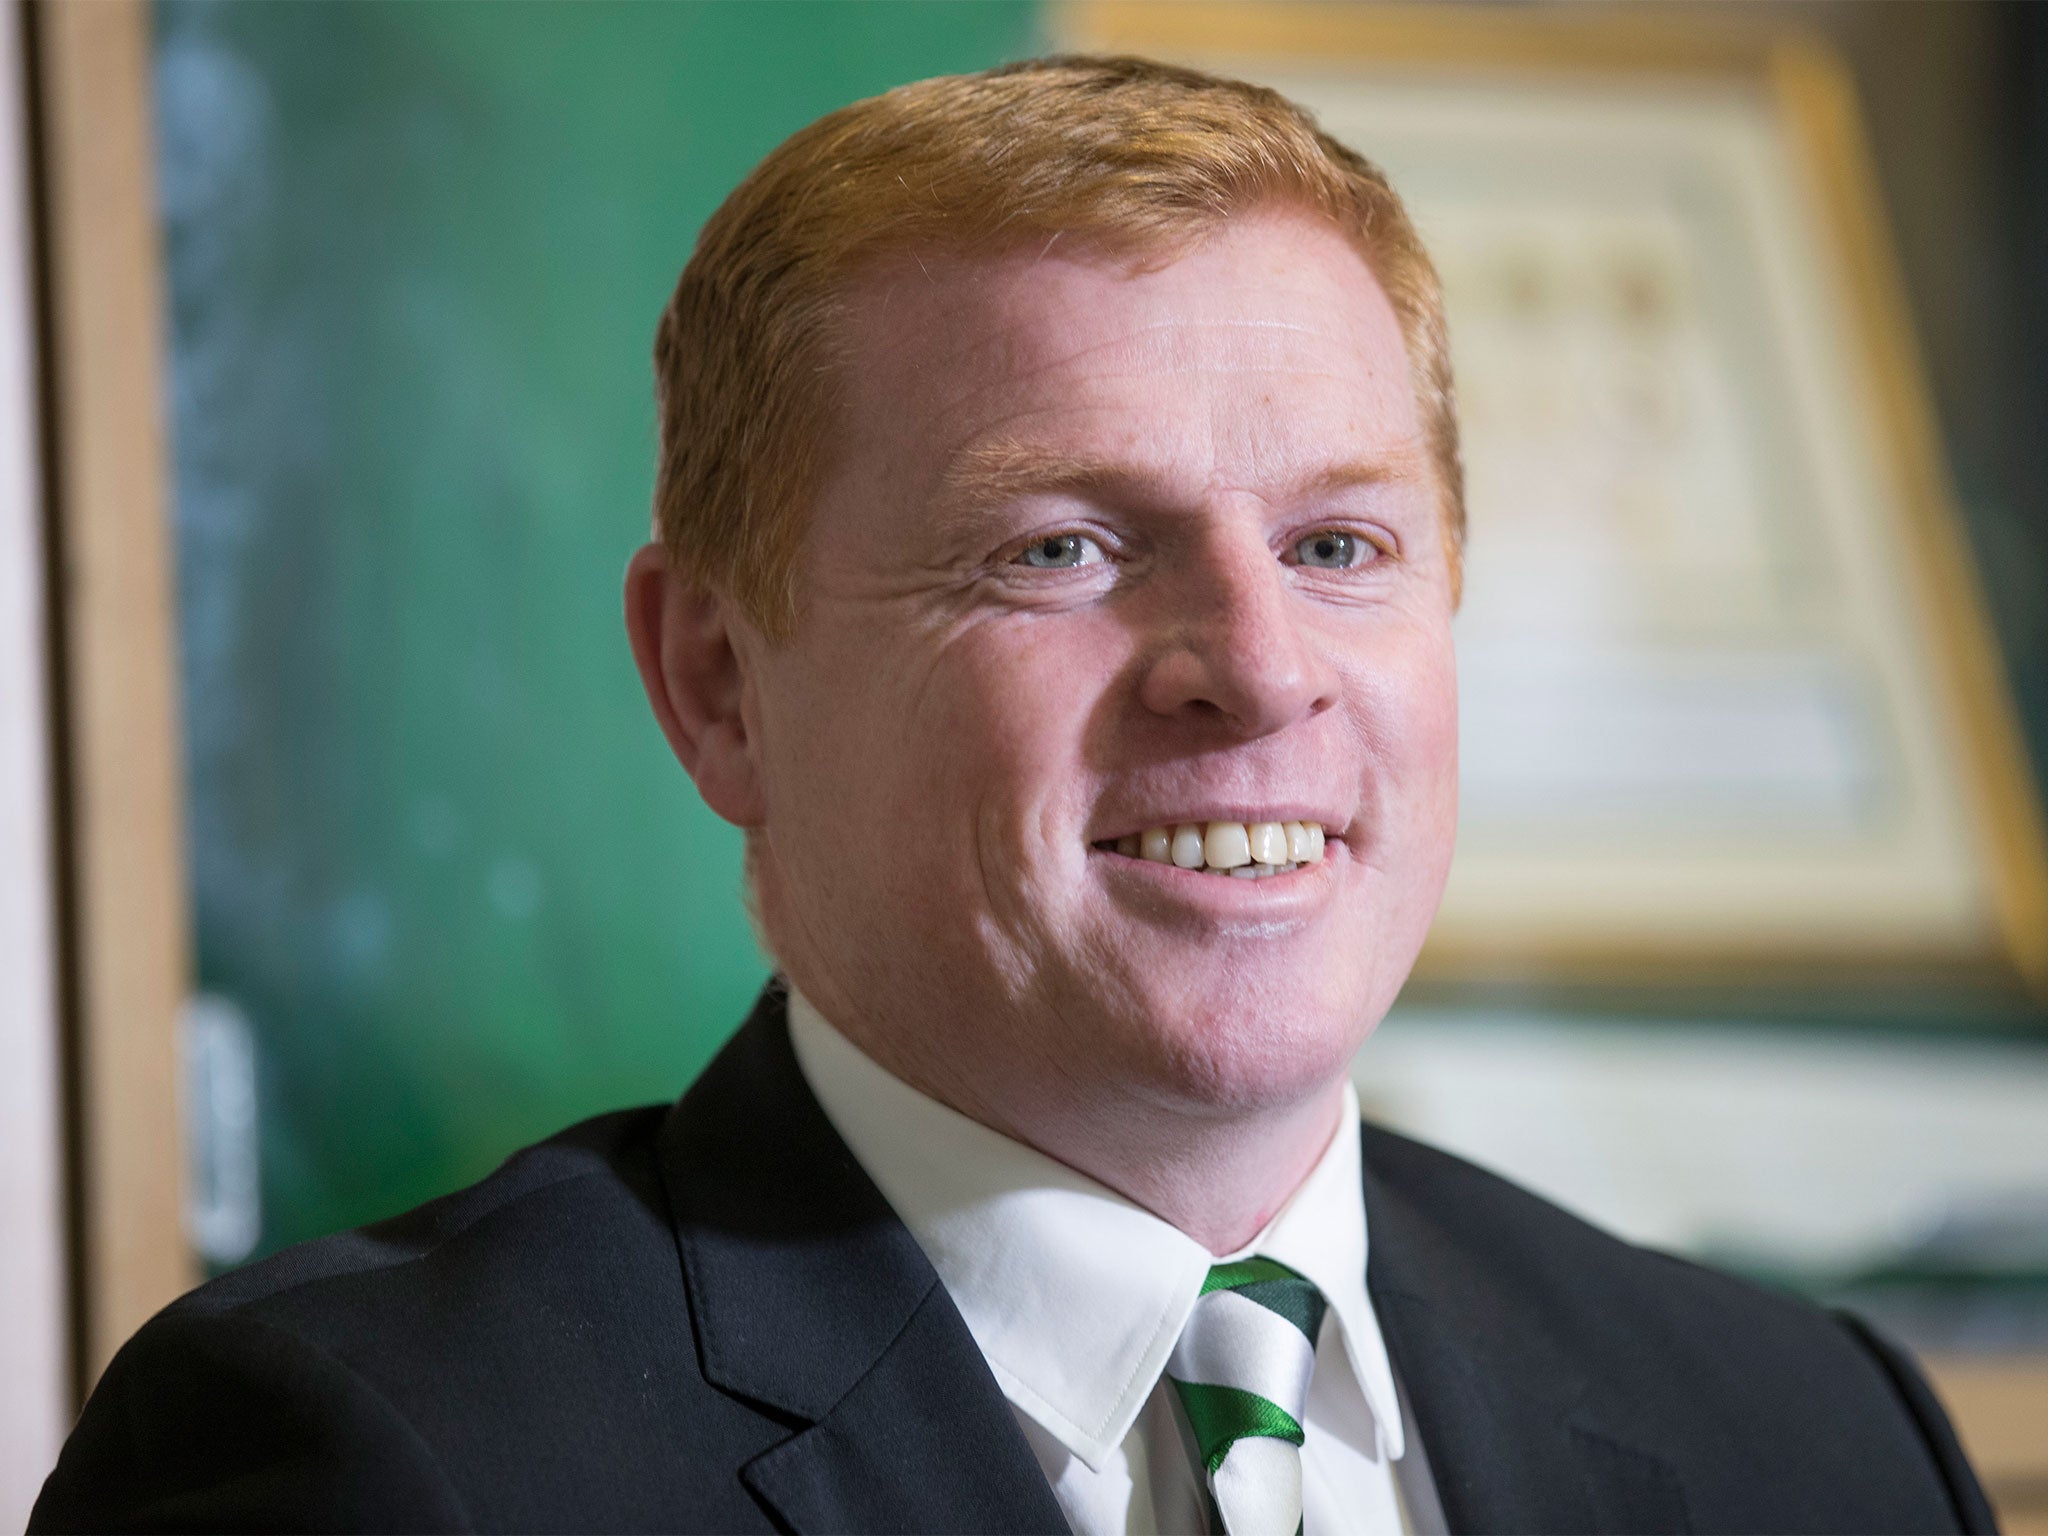 Neil Lennon is unveiled as Hibs manager with a smile, a smile that attracts so much hate